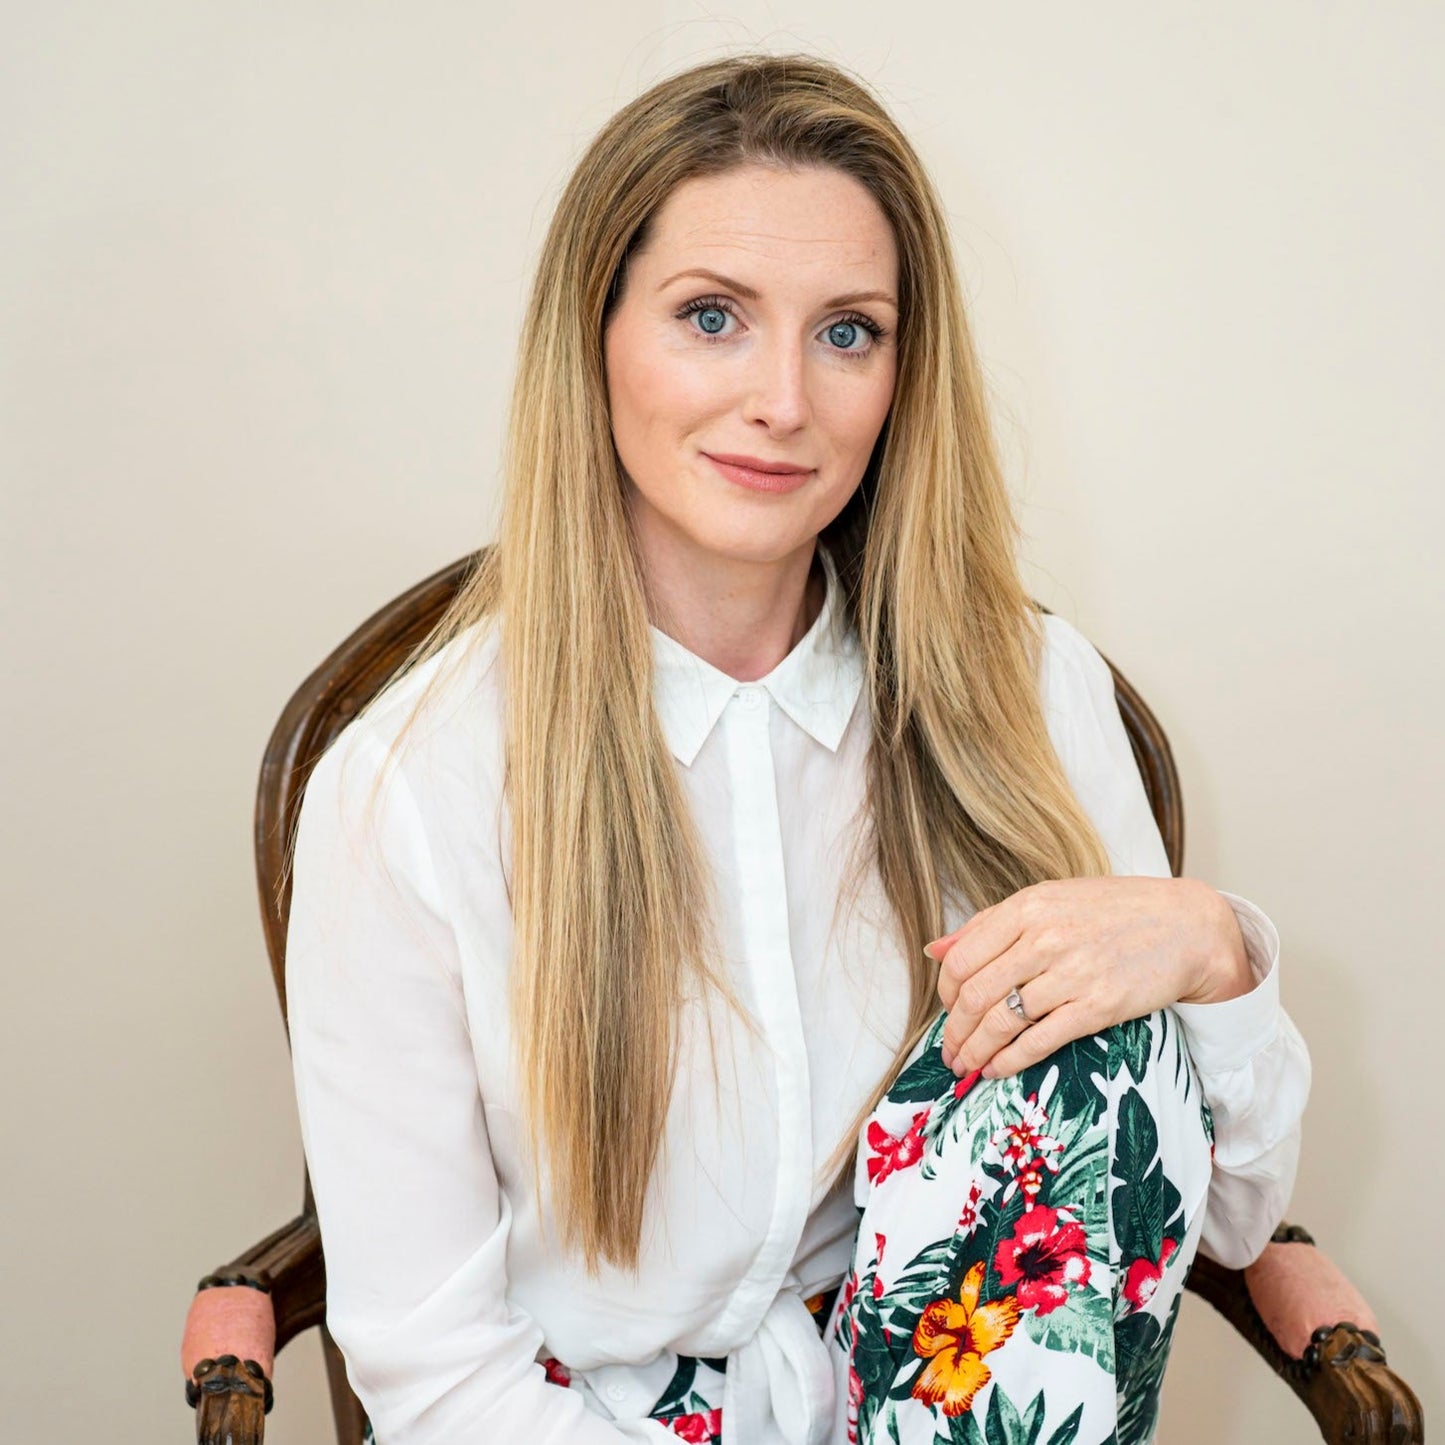 Bowe Organics Founder Diane is photographed sitting in a wooden chair with arm rests and a coral  fabric. Diane has long blonde hair and bright blue eyes and she's seen with one leg raised up to her torso in a sitting position with her hand resting on her knee. Diane is wearing a white collared shirt and printed trousers with tropical flowers on them